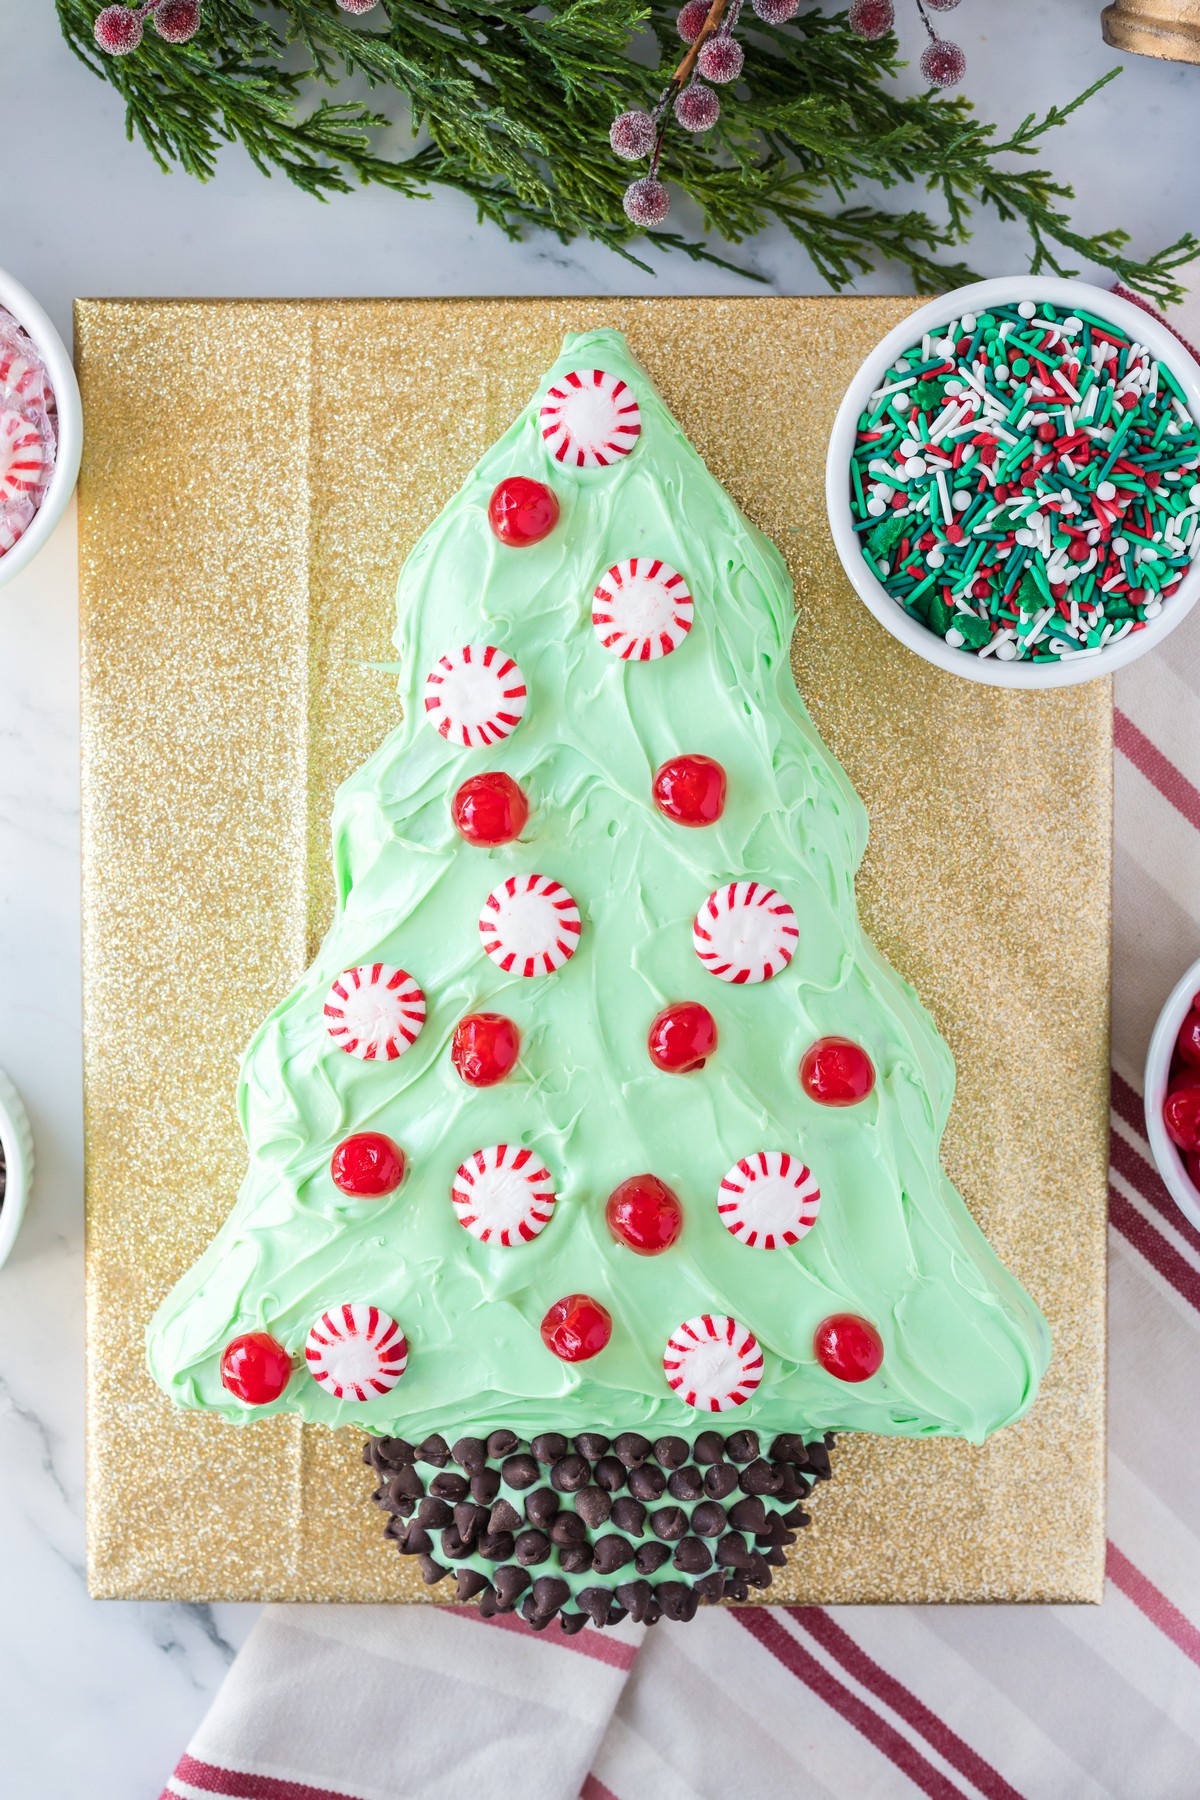 https://www.southerncravings.com/wp-content/uploads/2022/10/Christmas-Tree-Cake-15.jpg